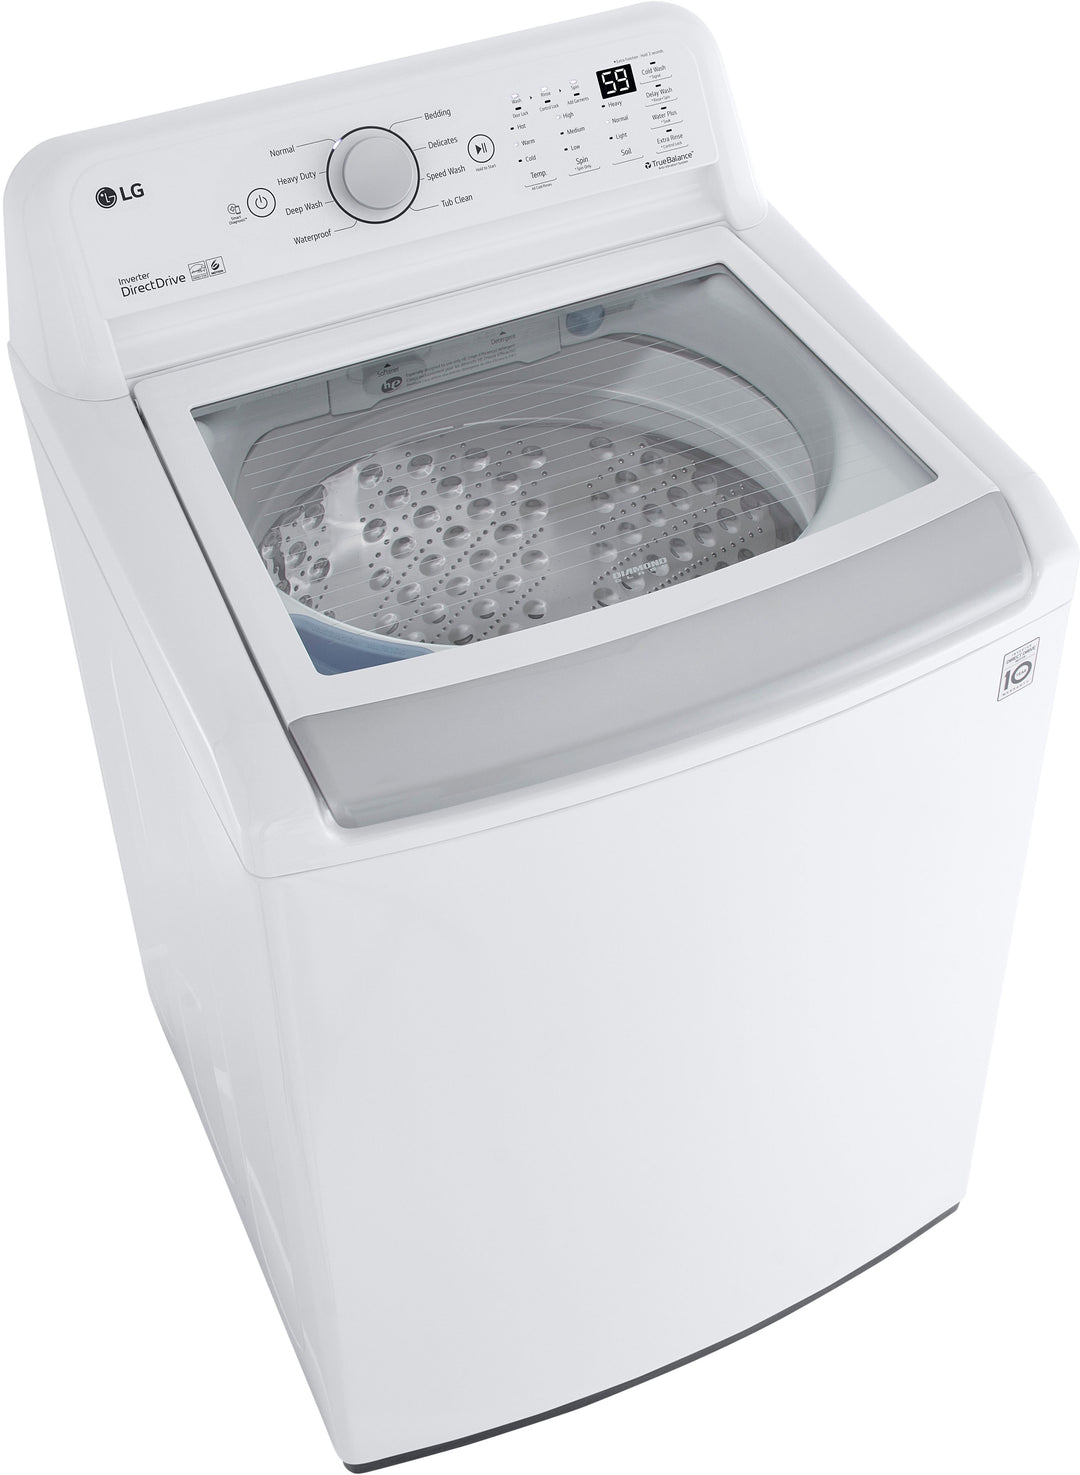 LG - 5.0 Cu. Ft. Smart Top Load Washer with 6Motion Technology - White_6